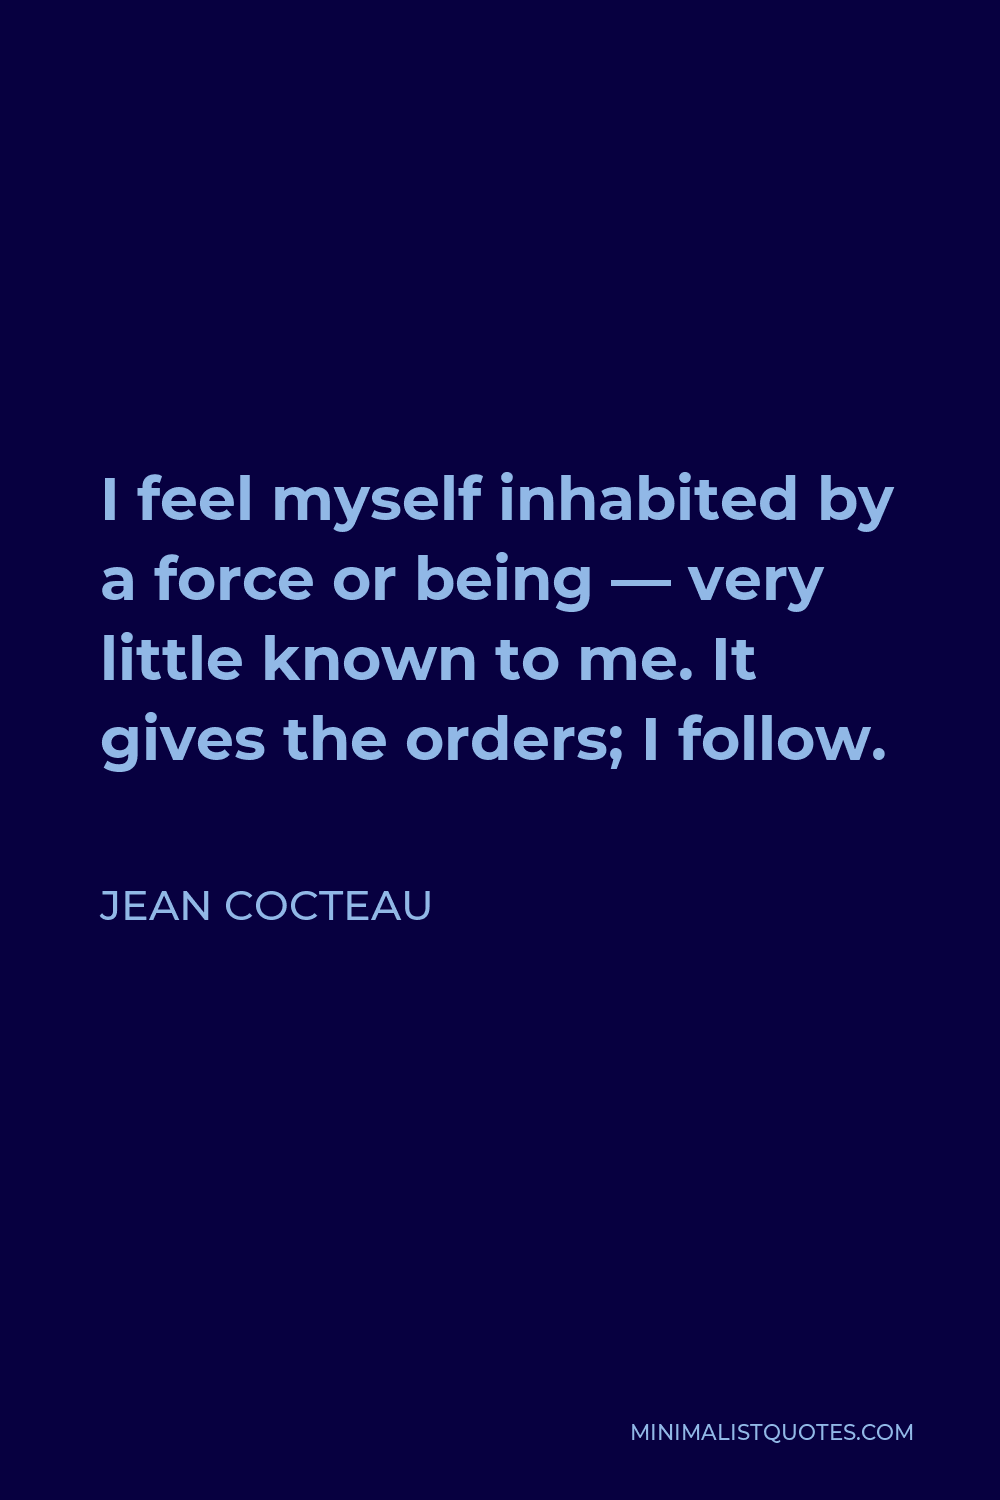 Jean Cocteau Quote - I feel myself inhabited by a force or being — very little known to me. It gives the orders; I follow.